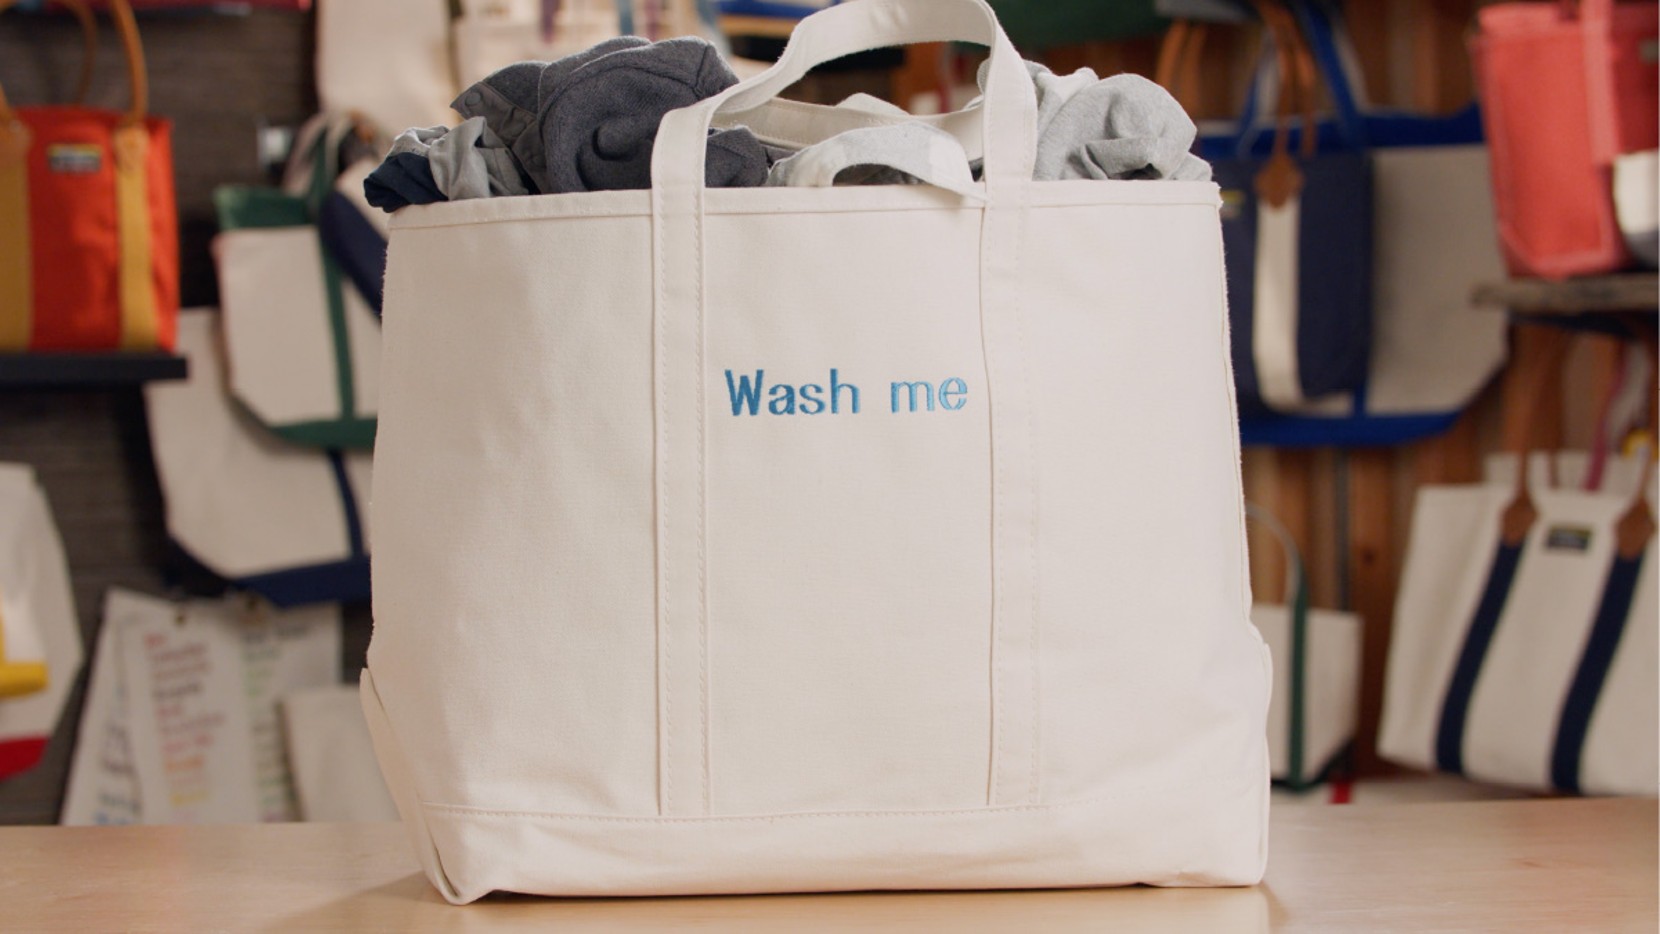 A large all white Boat & Tote with light blue monogram - "Wash me"